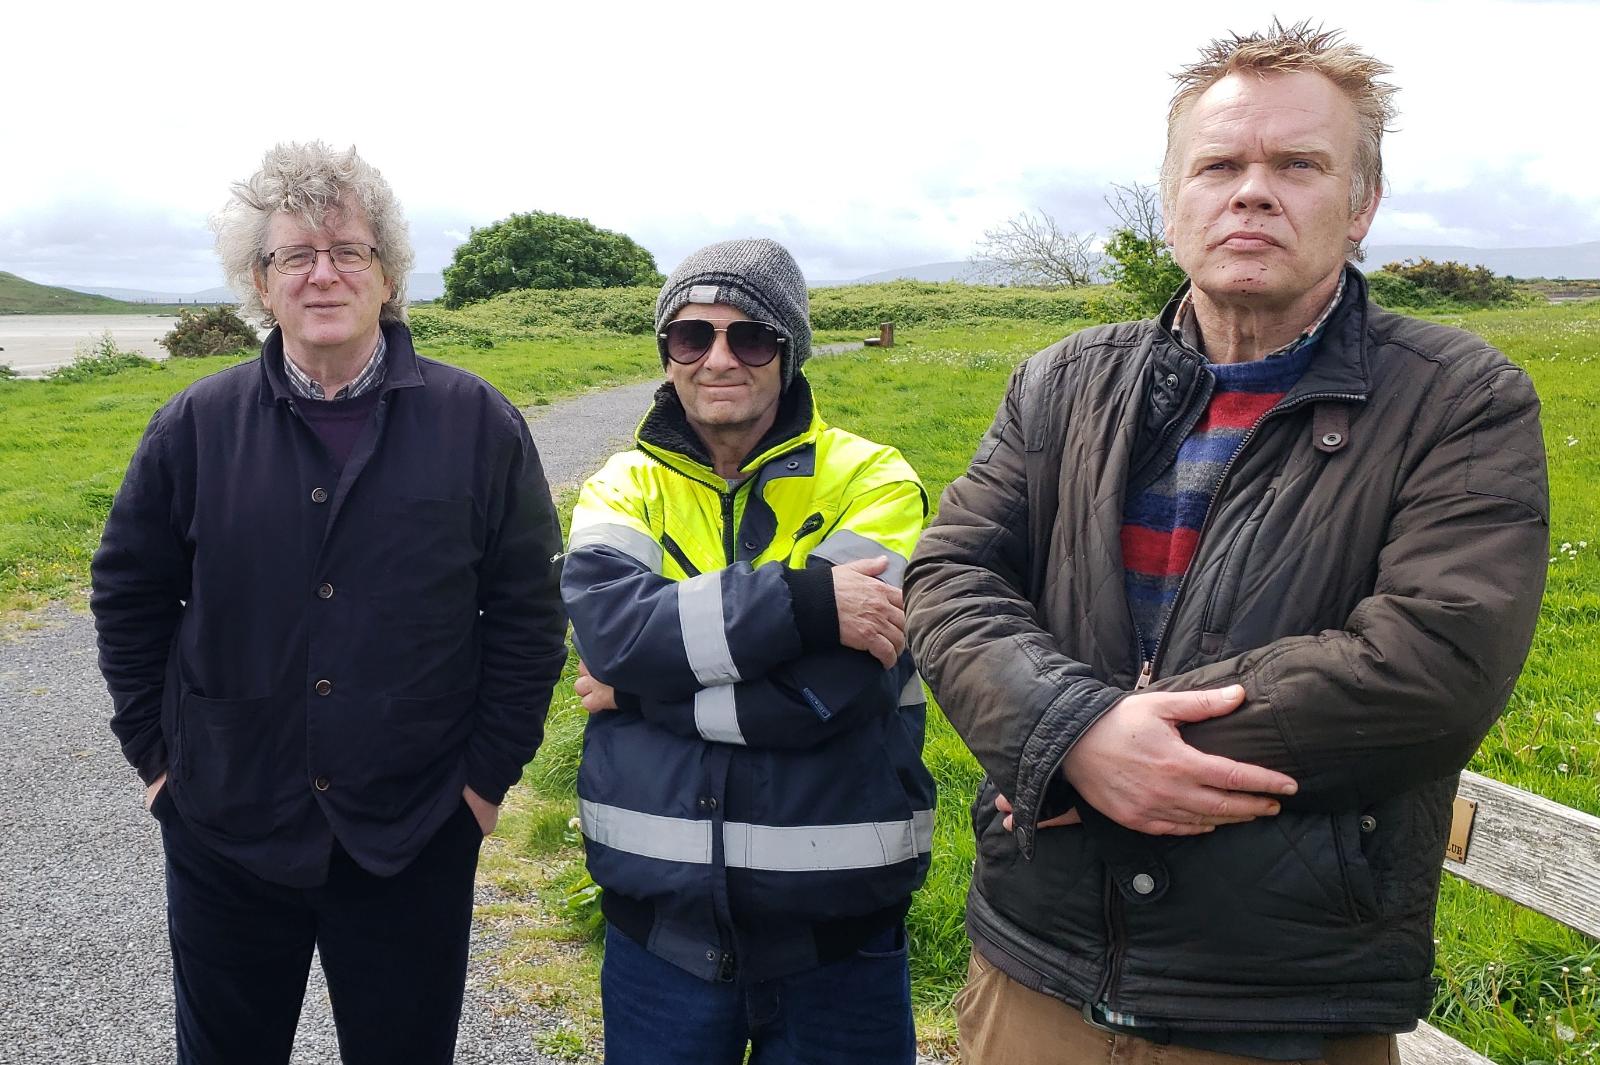 Galway City Council Heritage Officer, Jim Higgins (L), with Tommy Conneely and Declan O'Shea (R), of Galway Civic Trust (Photo by Tom Quinlan).